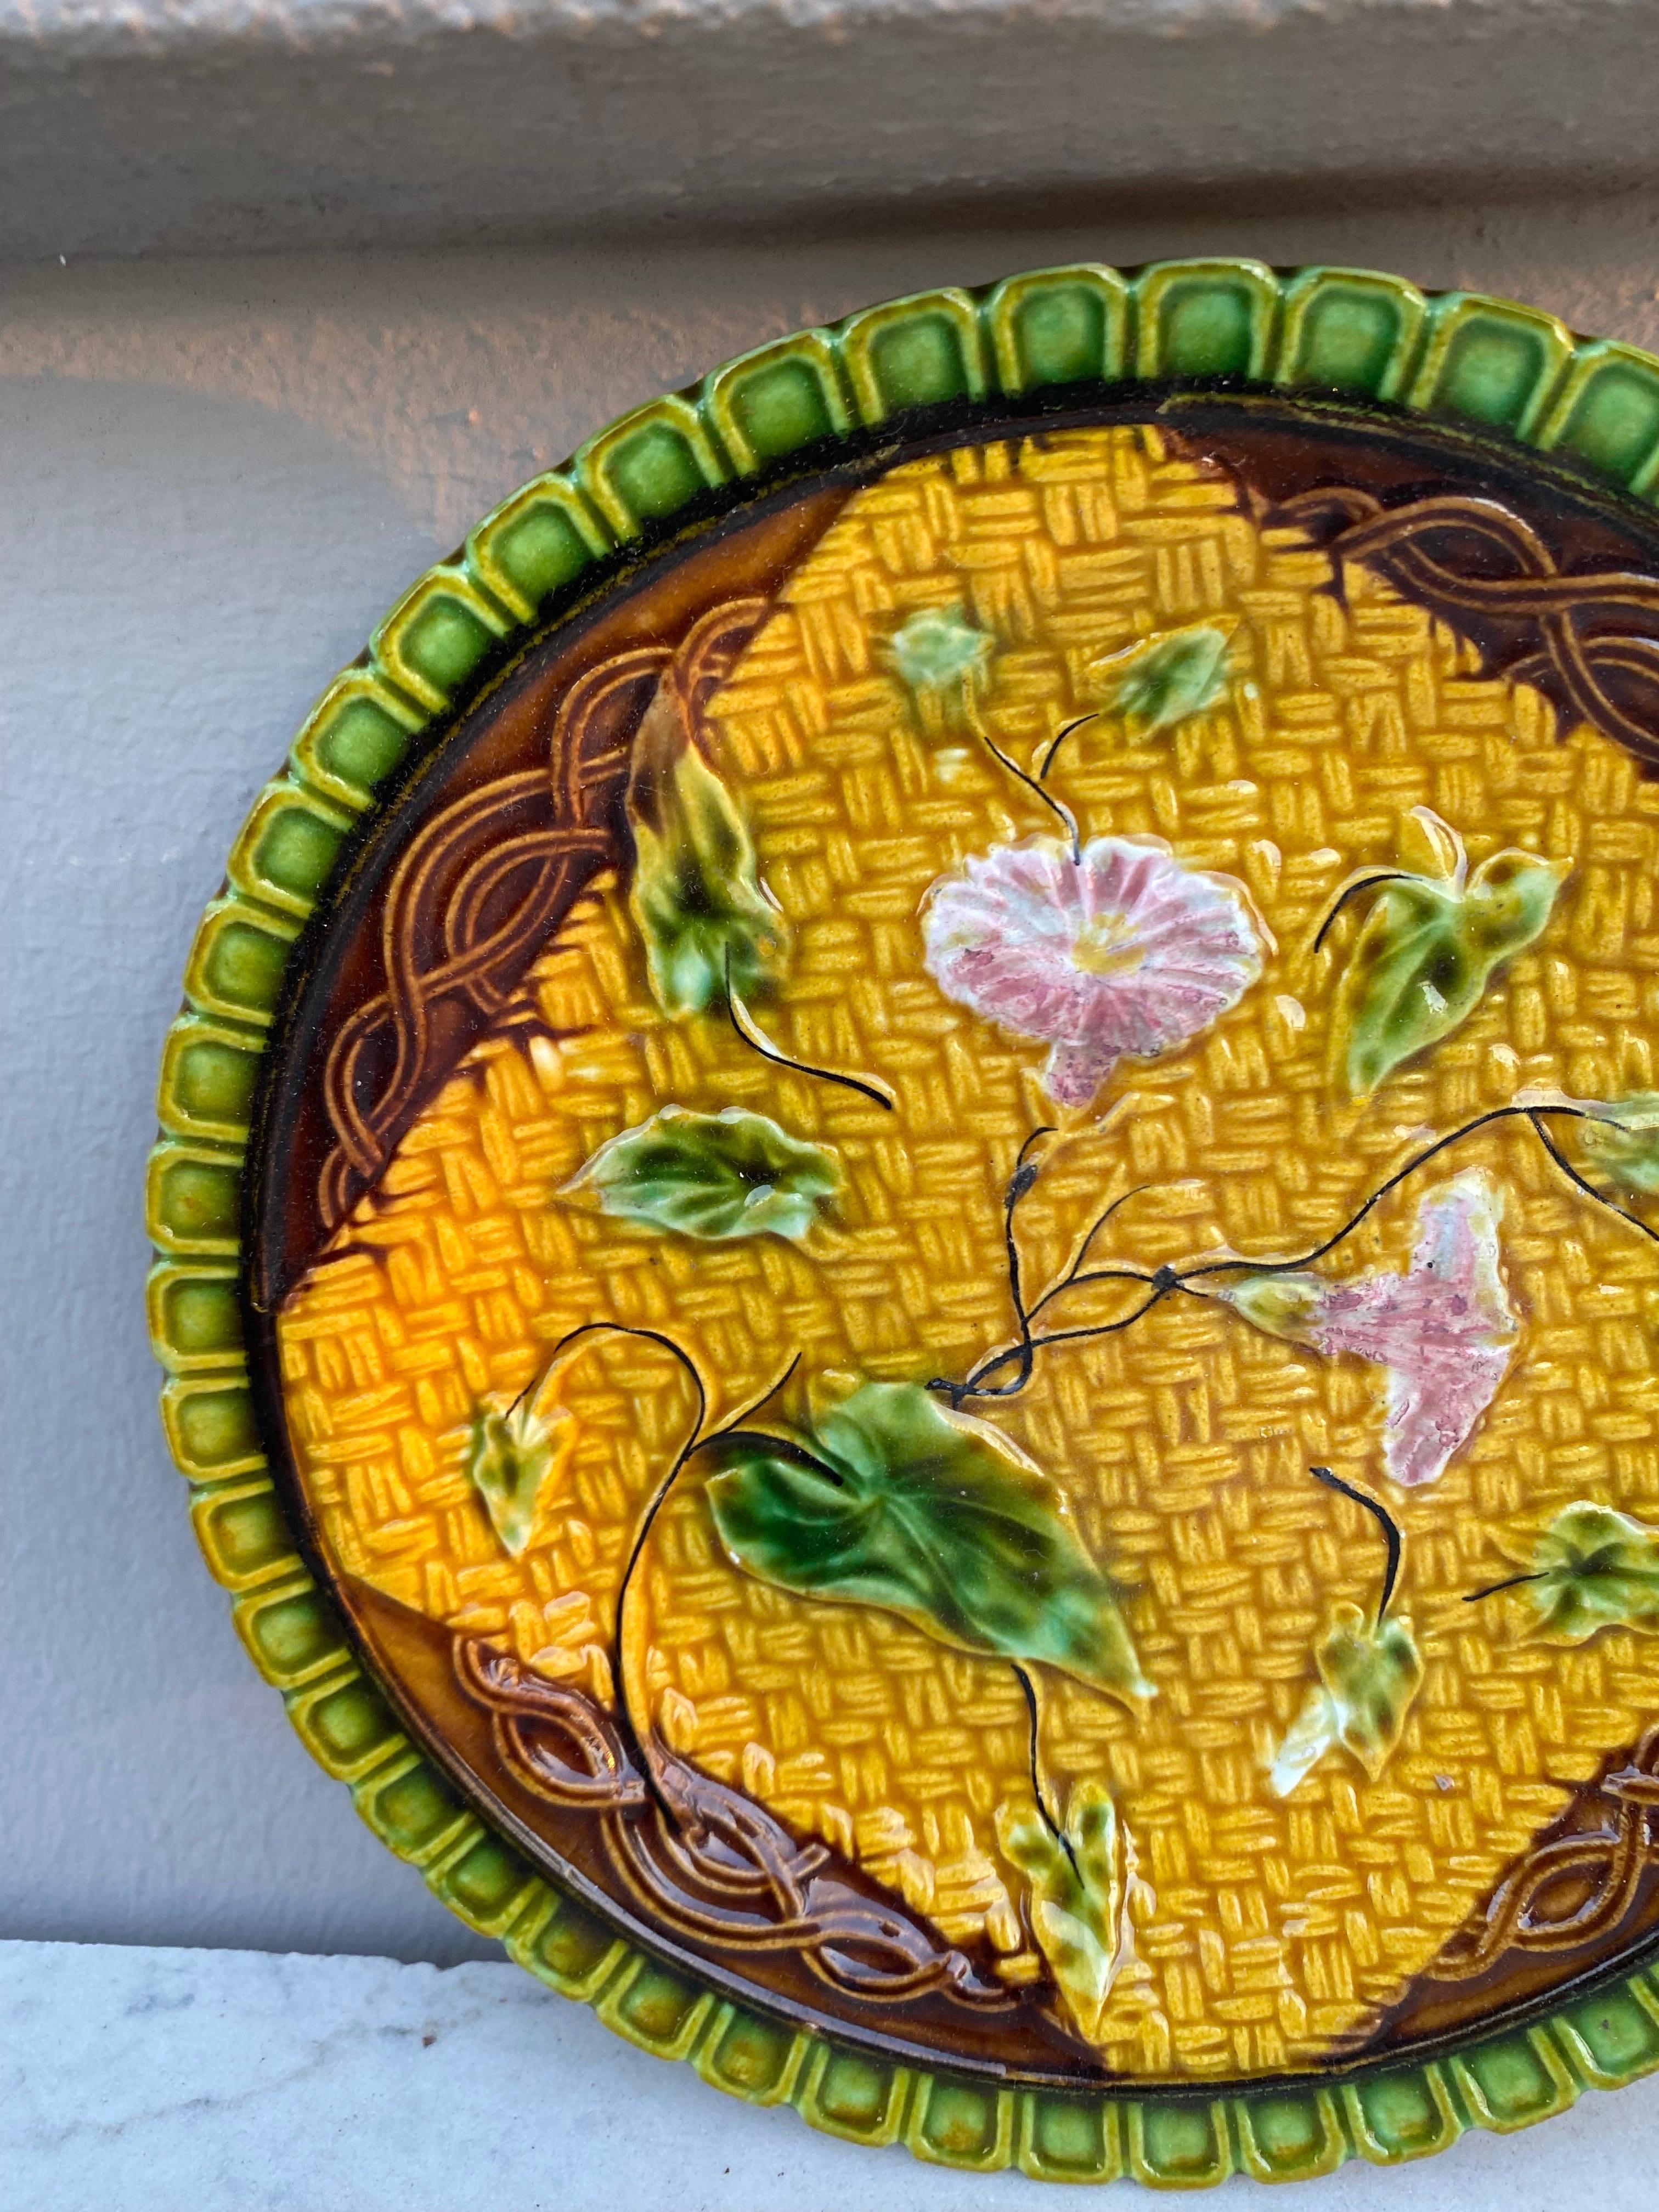 German Majolica plate with morning glory on a yellow basket weave and a green border, circa 1900.